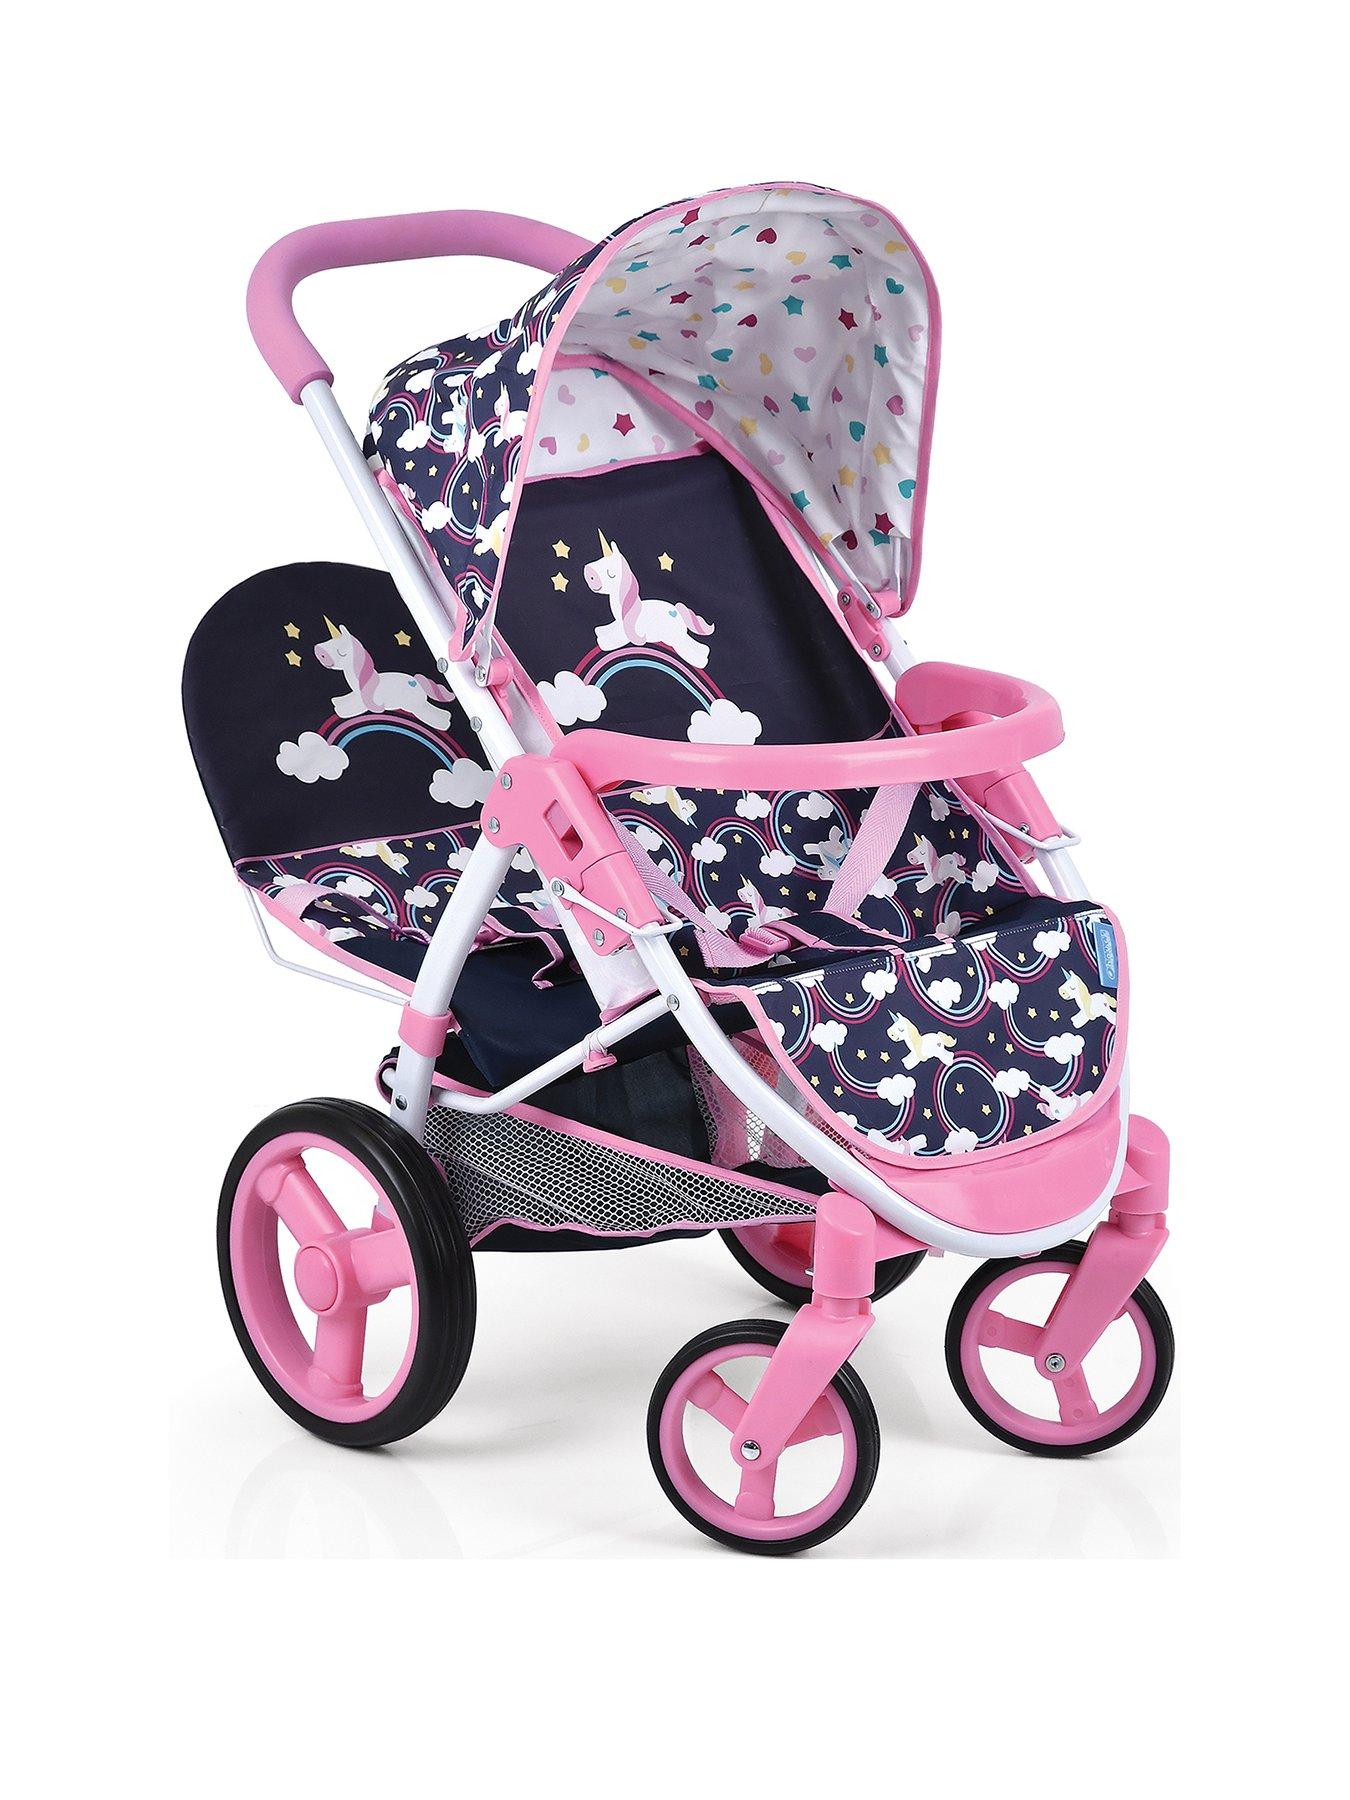 doll and pram set for 2 year old